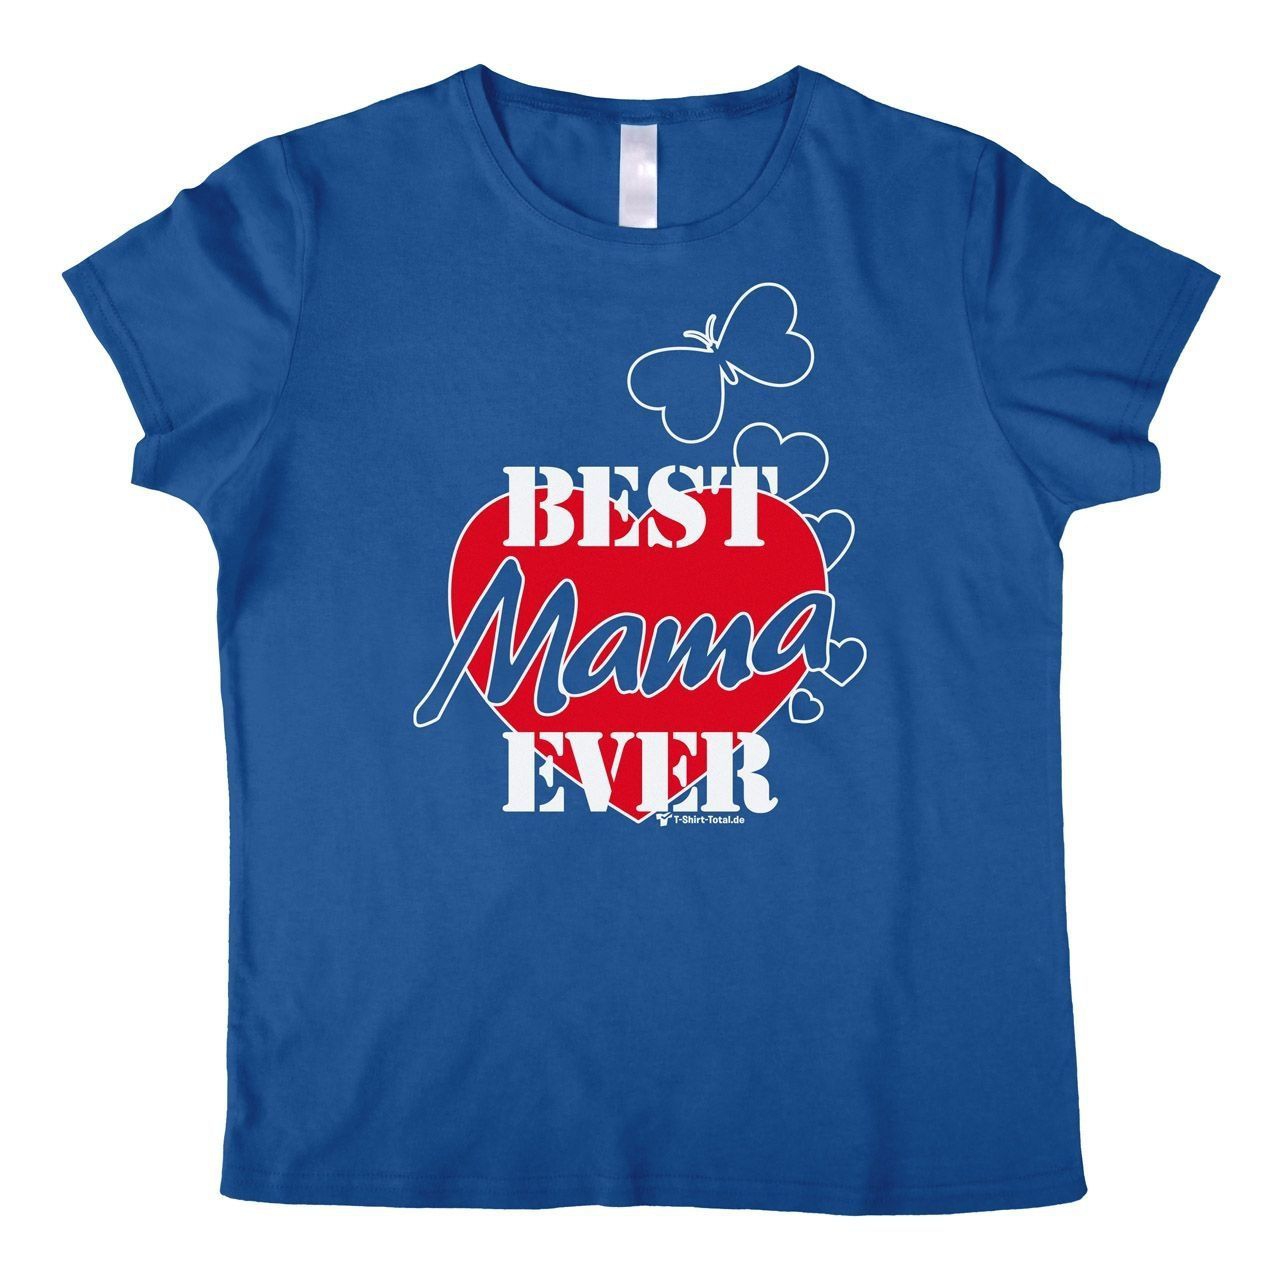 Best Mama ever Woman T-Shirt royal Extra Large